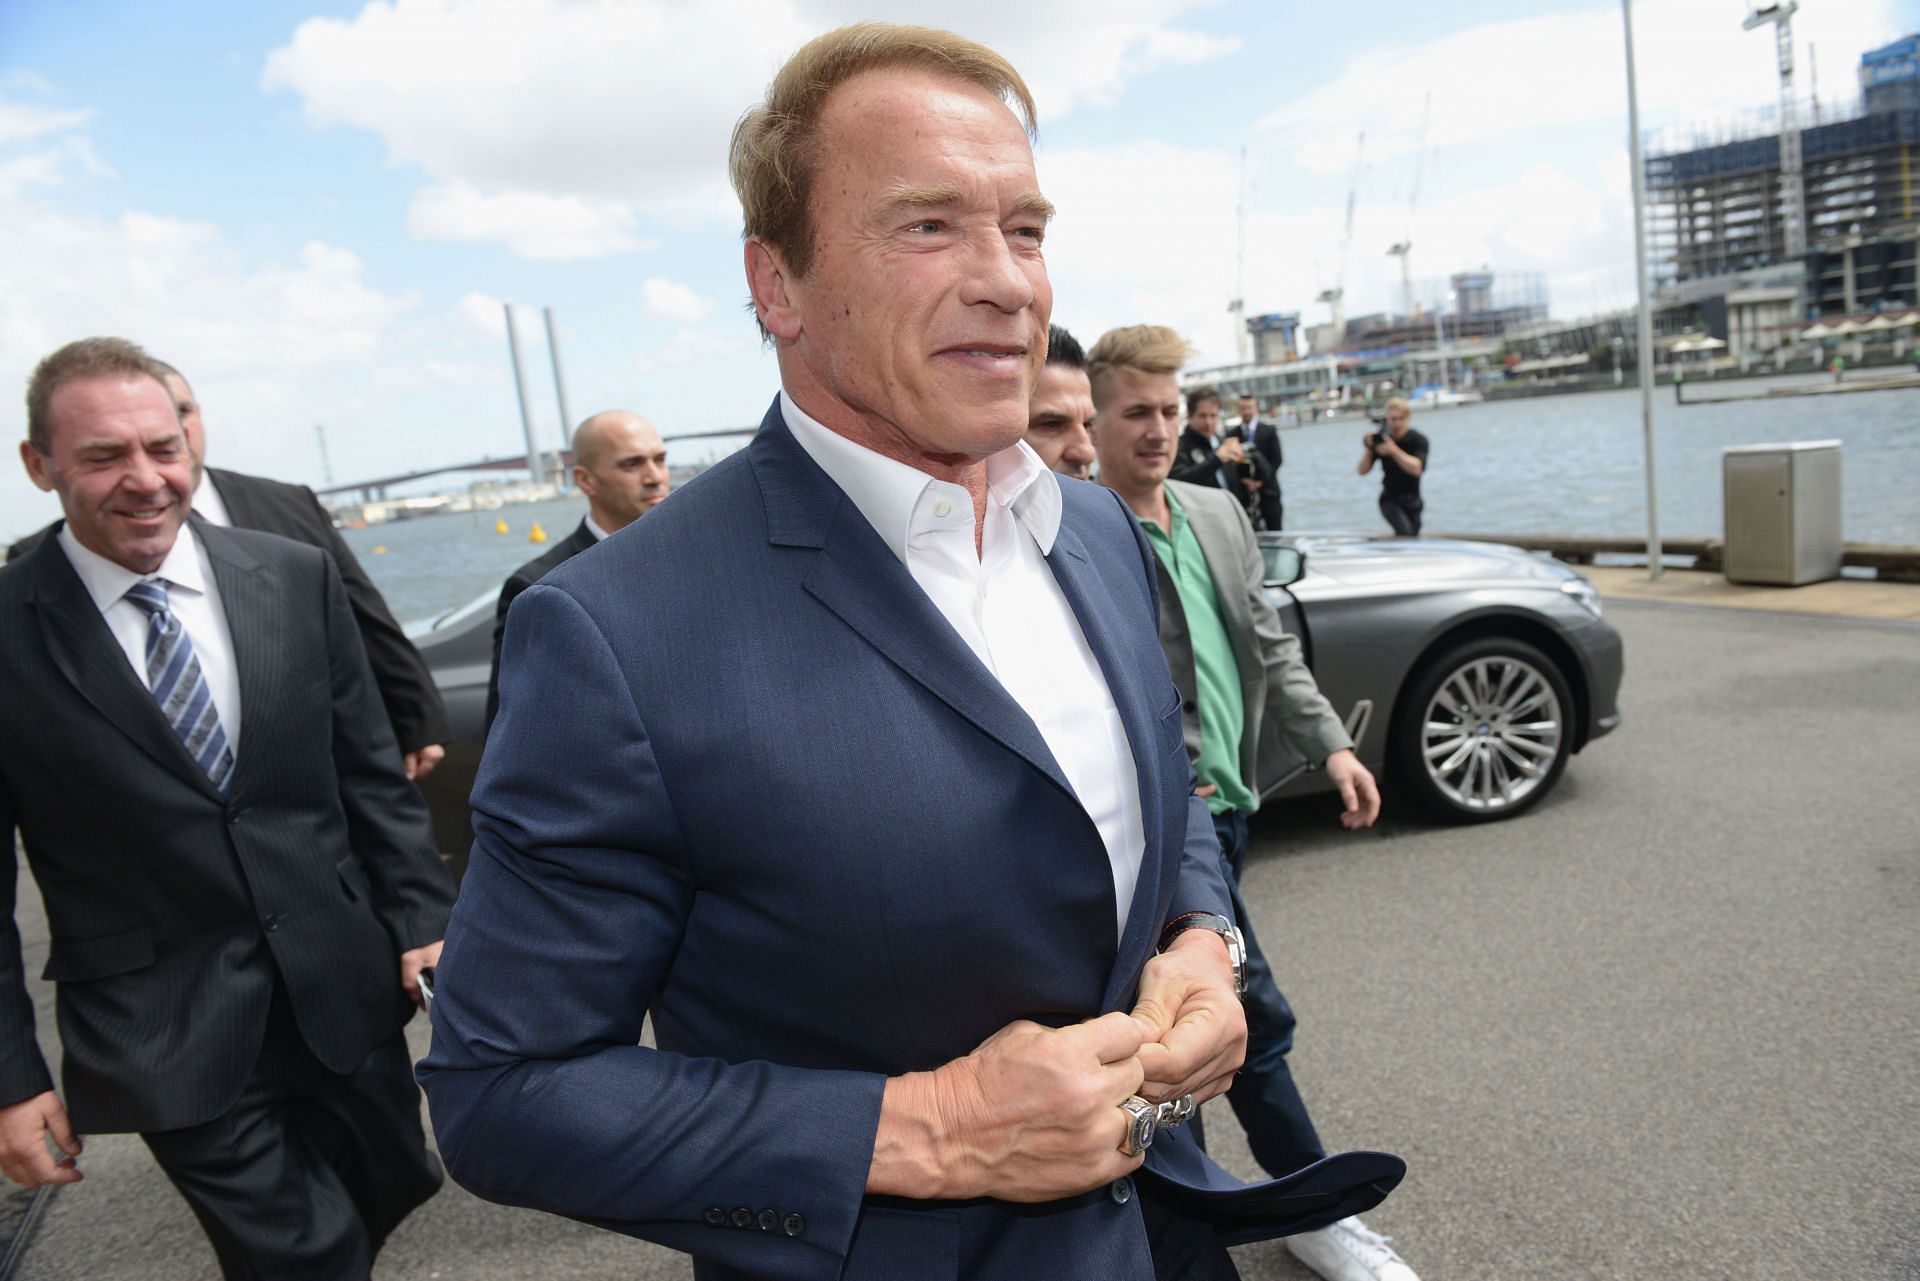 Actor and former Governor of California Arnold Schwarzenegger and Tony Doherty arriving for the Arnold Classic Sports Festival Press Conference in 2016